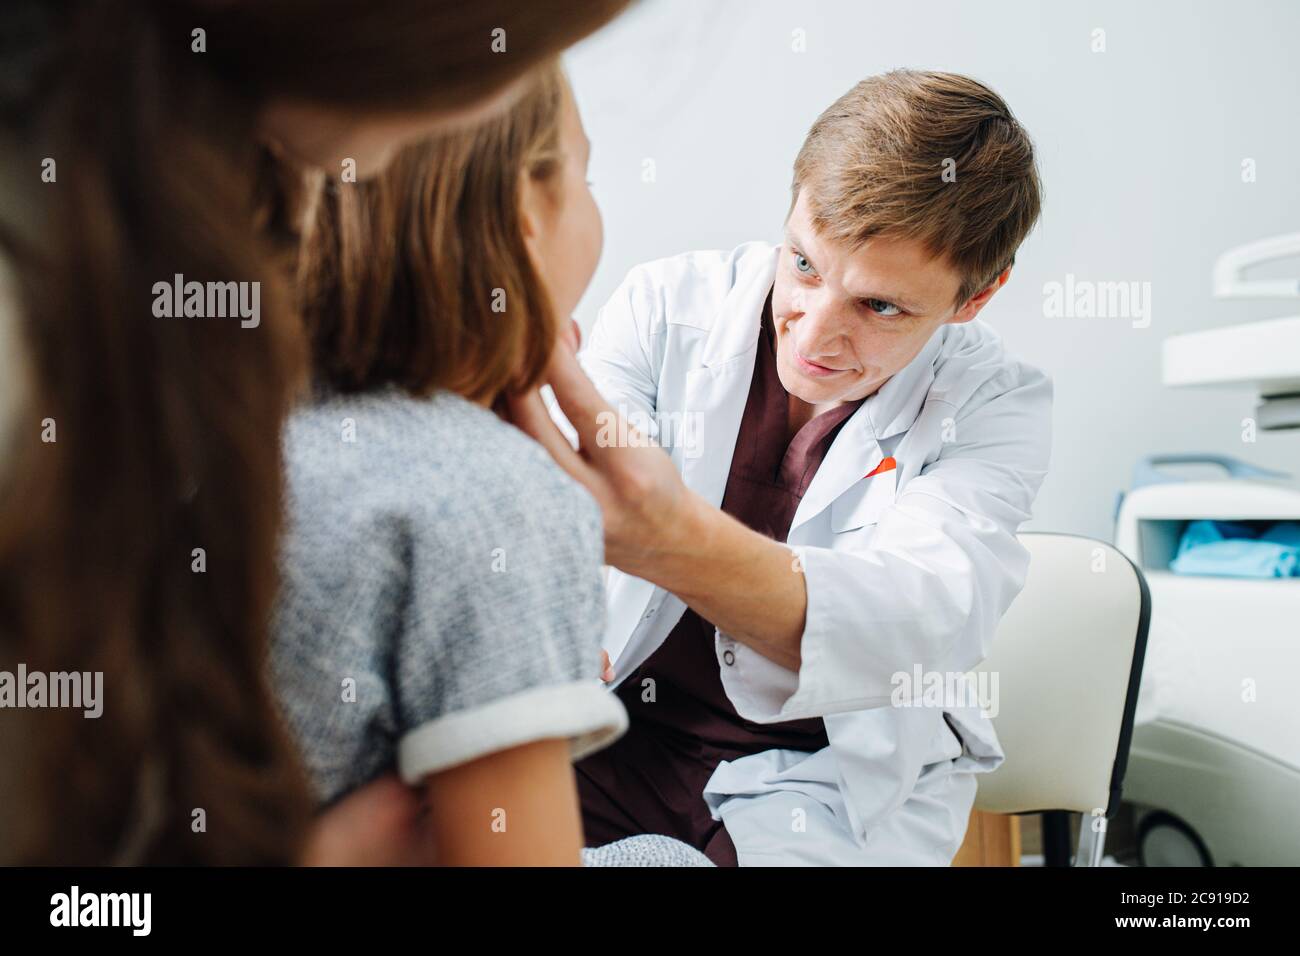 Little girl in being examined by friendly pediatrician, sitting on mom's lap Stock Photo